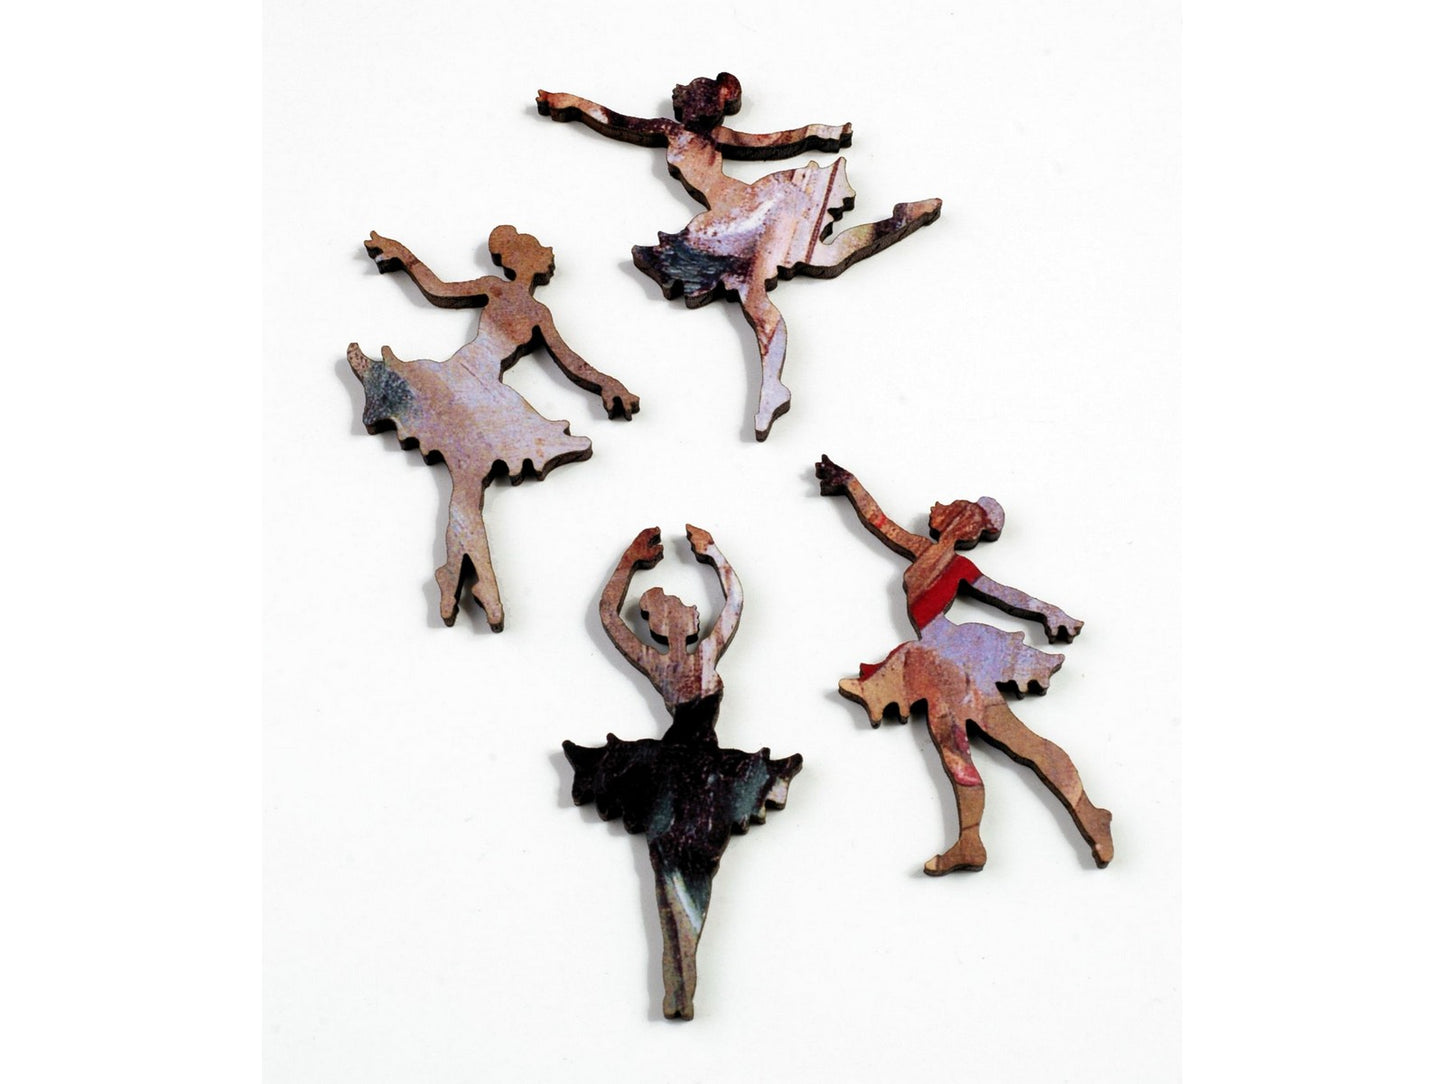 A closeup of some whimsy pieces, picturing four ballerinas. 